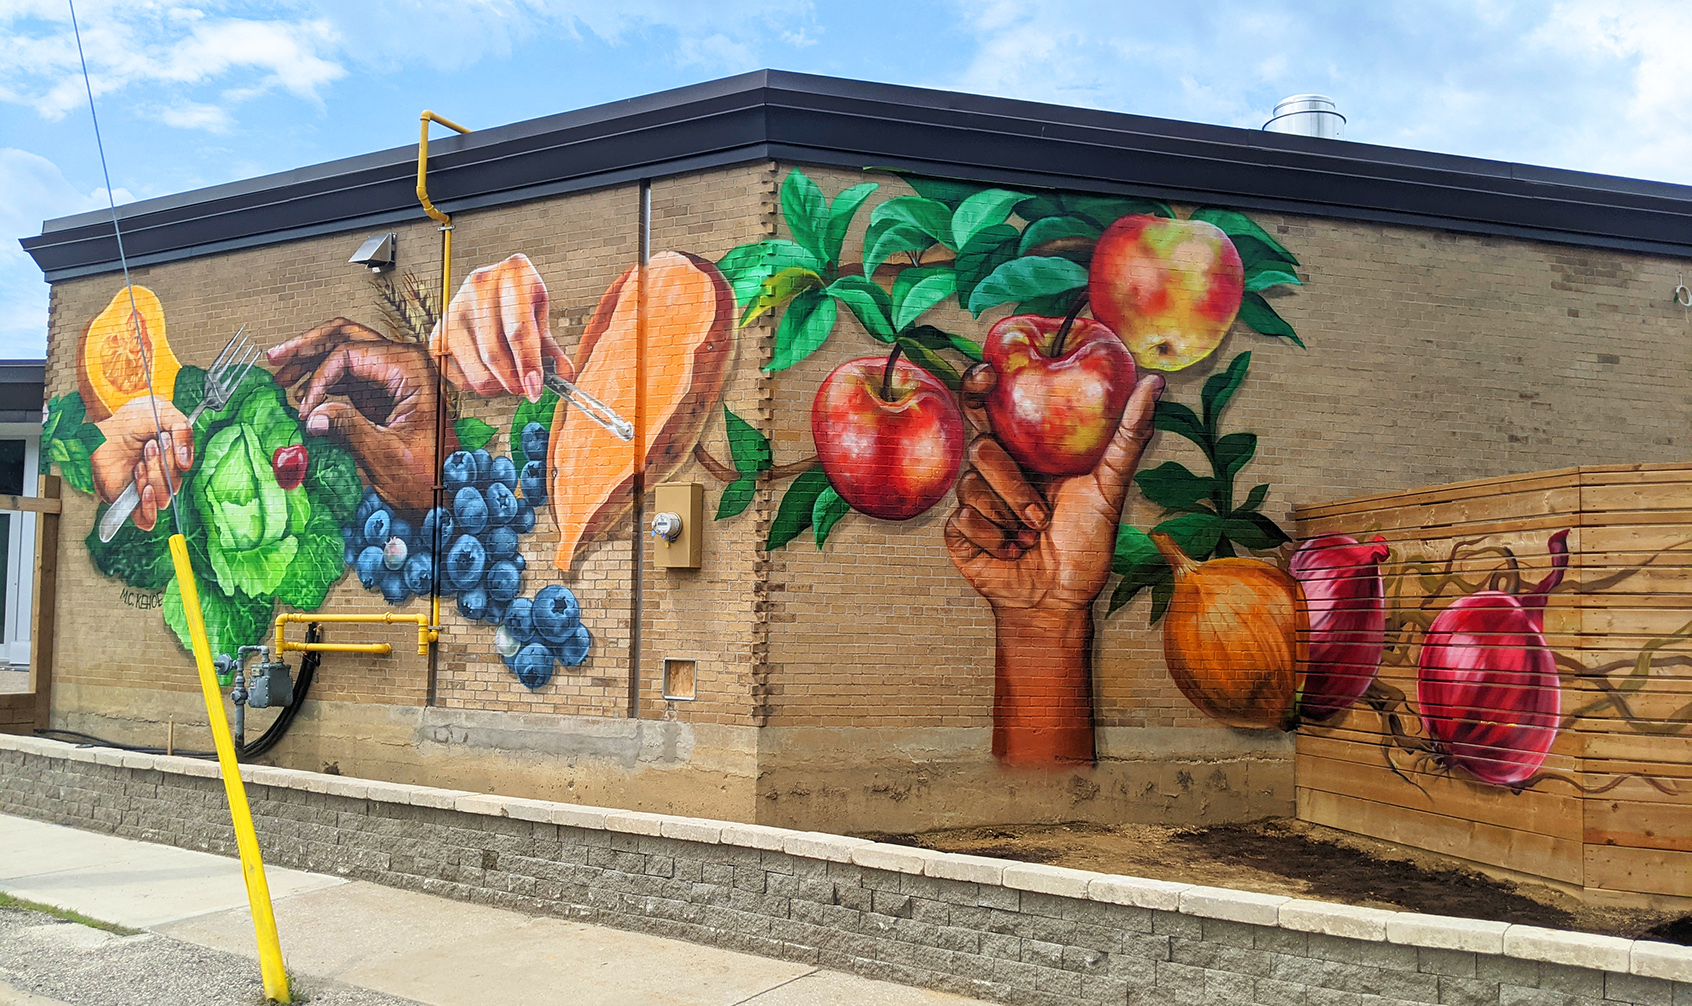 Horizontal photo that showcase a colourful mural by Meaghan Kehoe, it has hands holding various fruits and vegetables (ex. apples). It is painted on a corner of a brick building with a part of the blue sky and sidewalk showing.